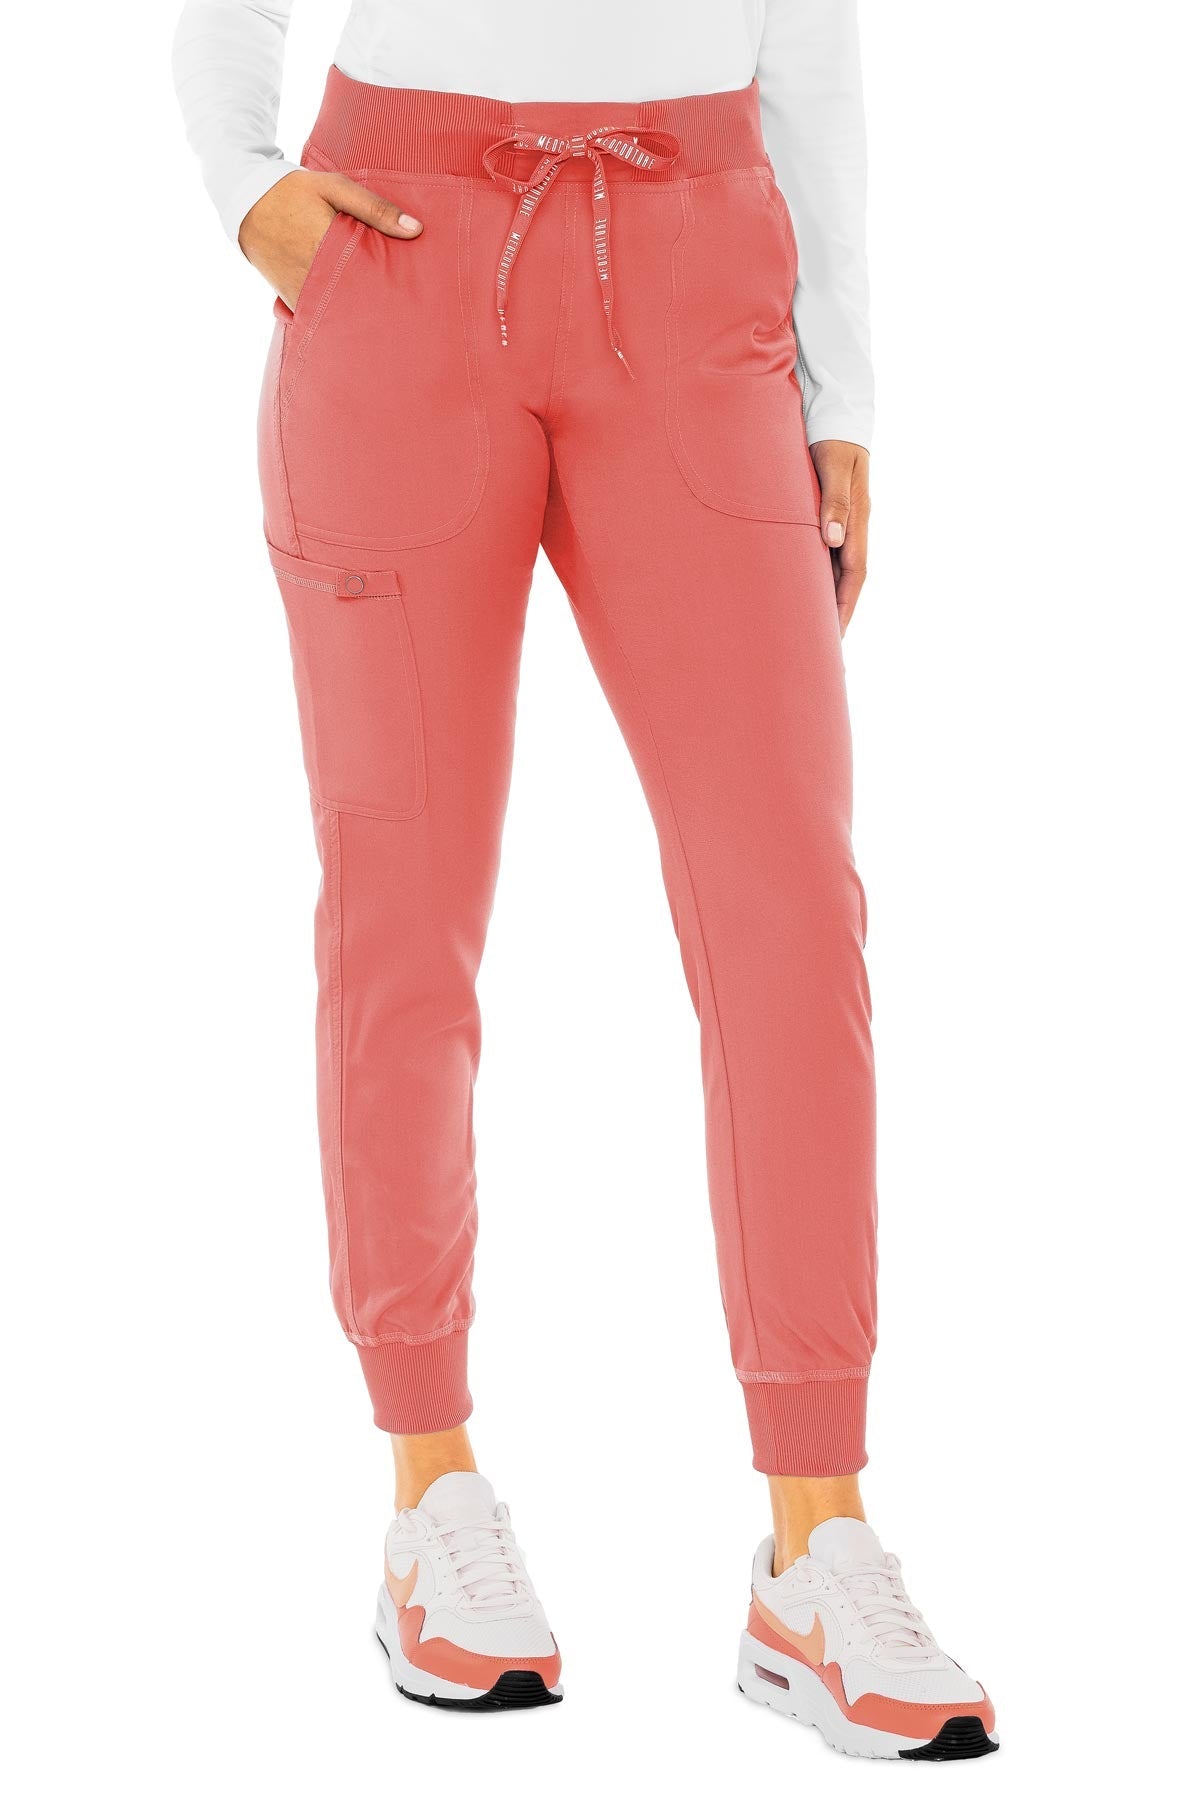 Med Couture Coral PANT